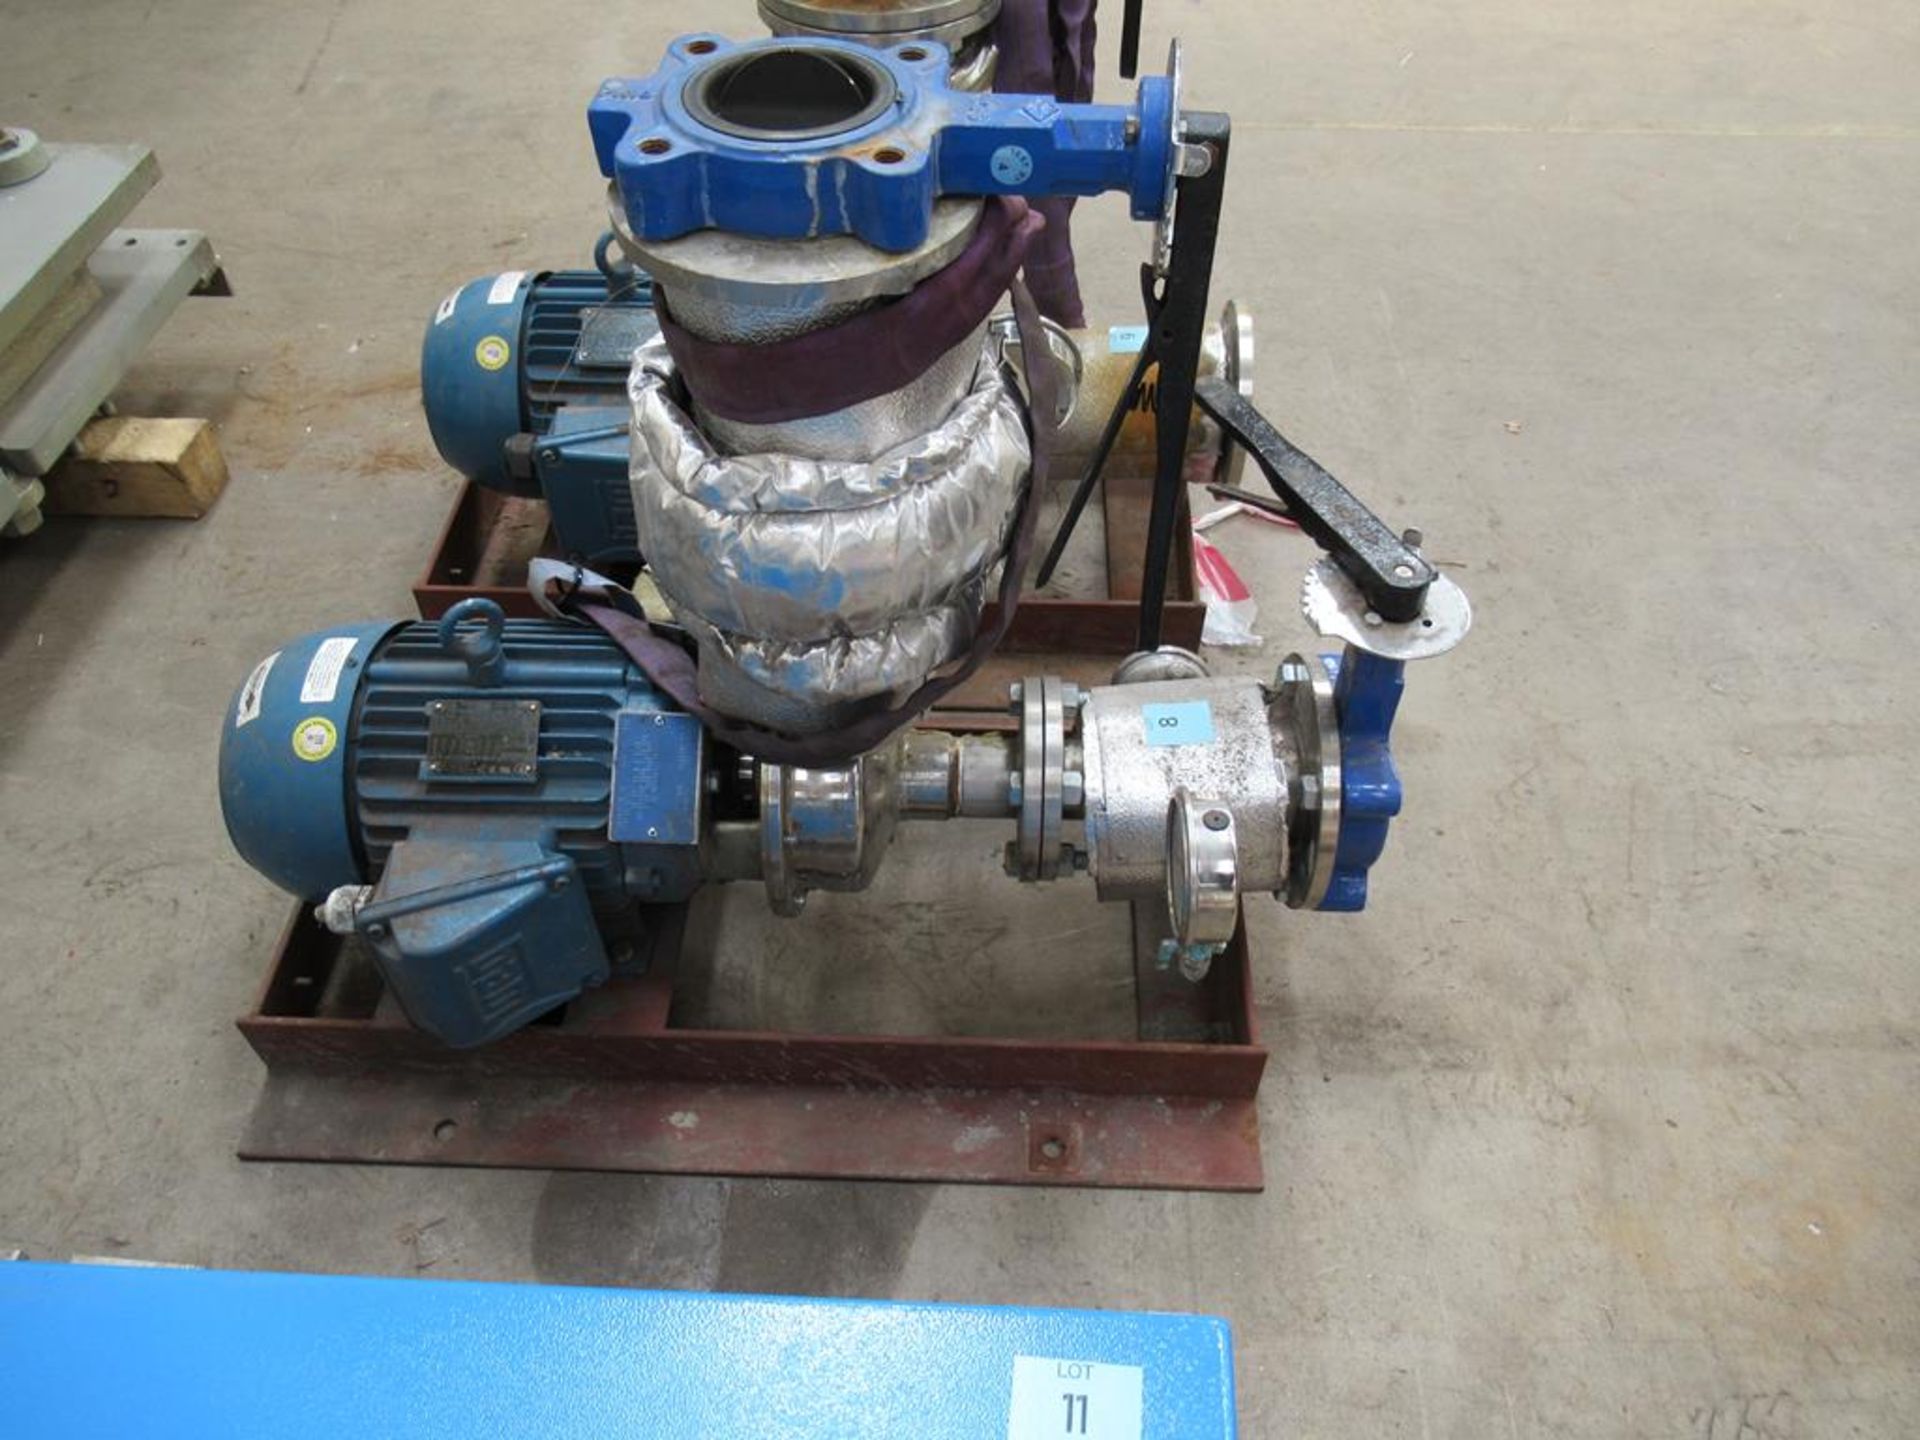 Kemco Systems pump unit with WAG motor